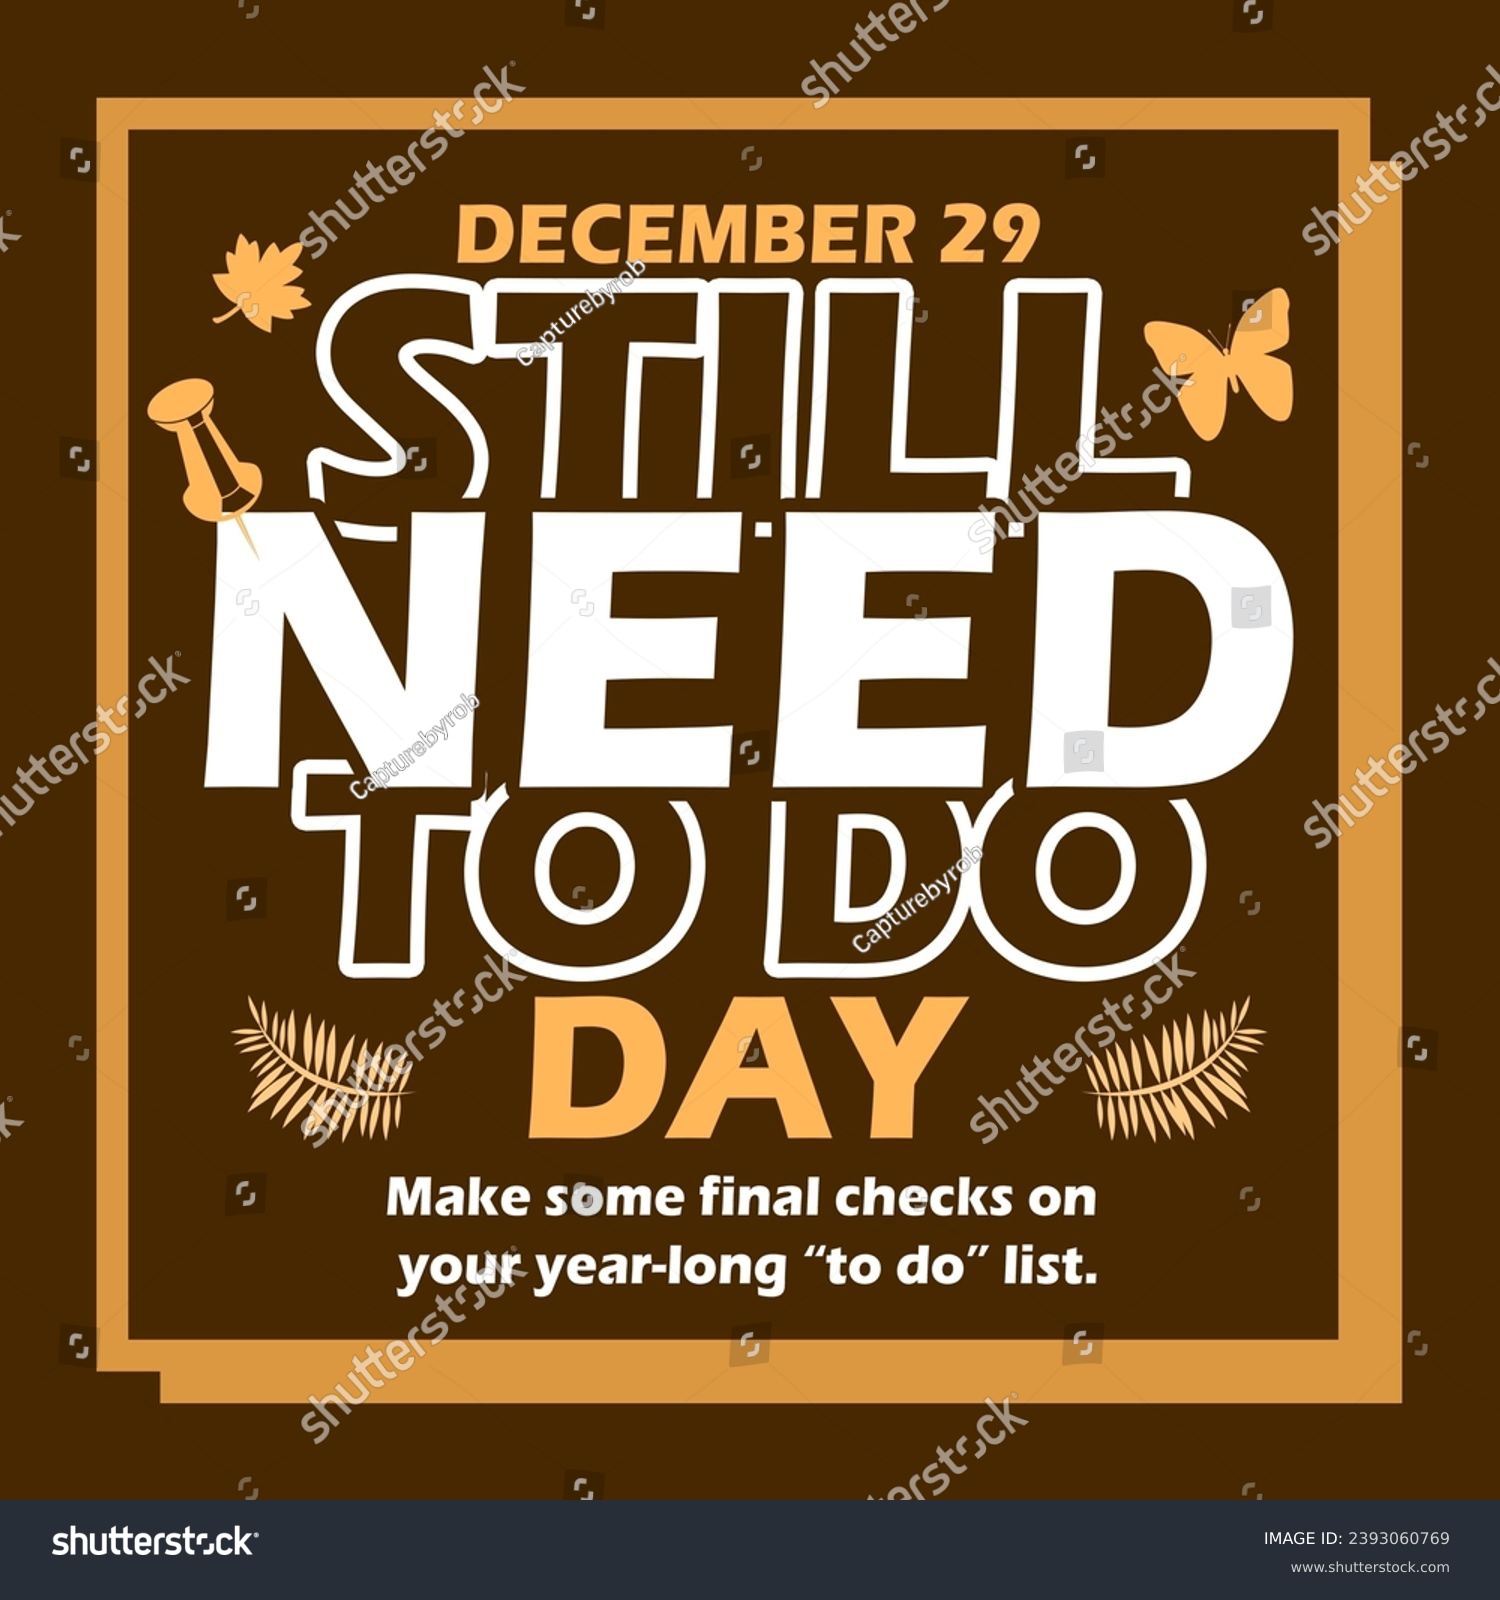 Still Need To Do Day event banner. Bold text with various decorative elements in frame on dark brown background to celebrate on December 29th #2393060769